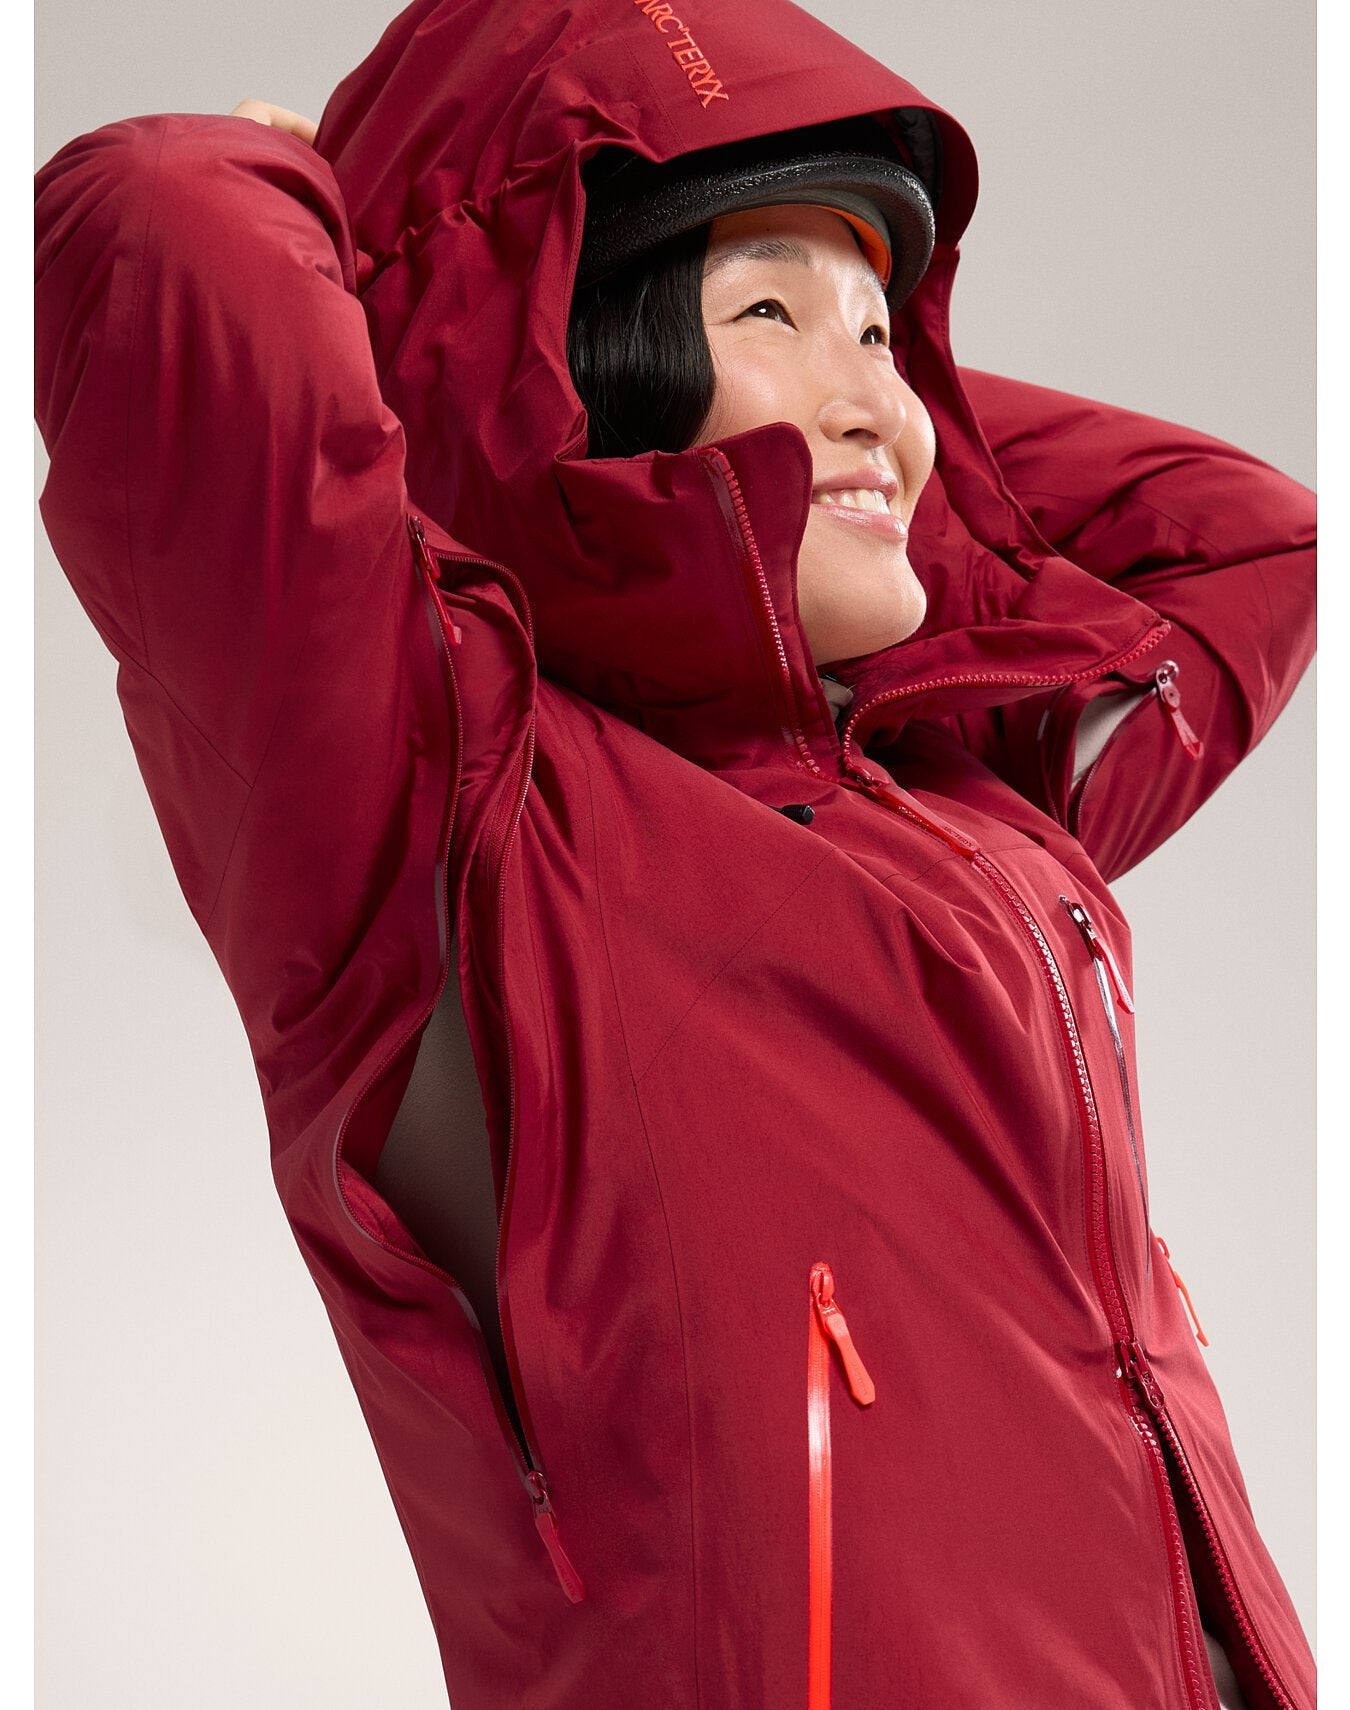 F23-X000006834-Beta-Insulated-Jacket-Bordeaux-Women-s-Hover_5ed5ae81-dc05-4d1a-a3a9-8c6b424b20a3.jpg